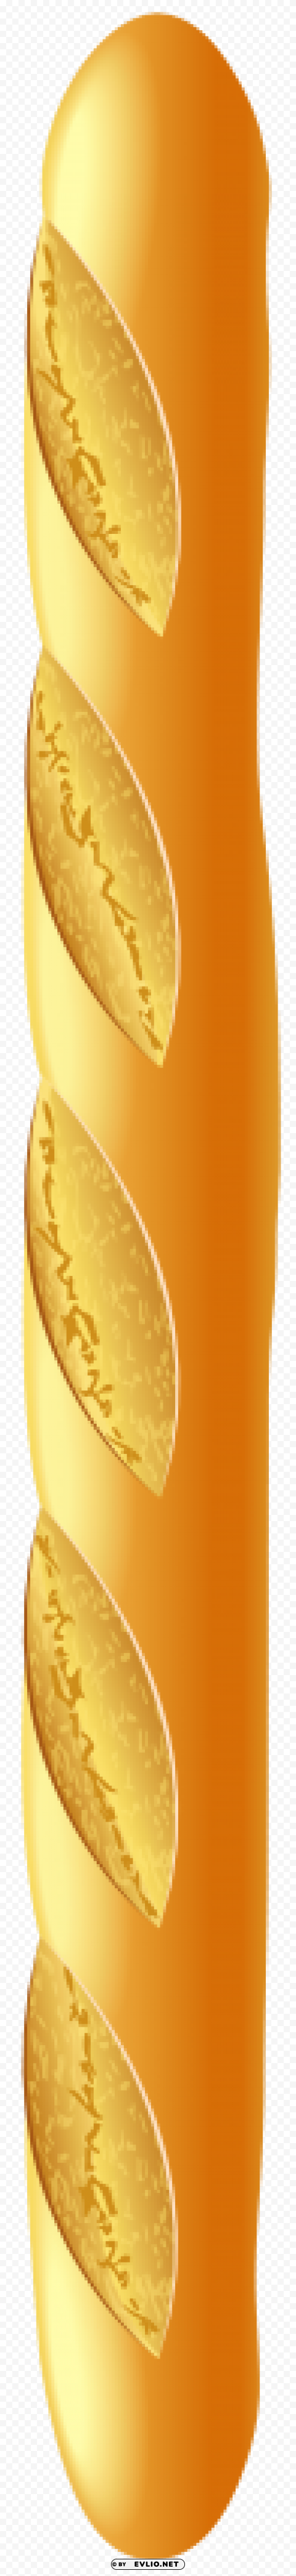 french baguette Transparent PNG images complete library